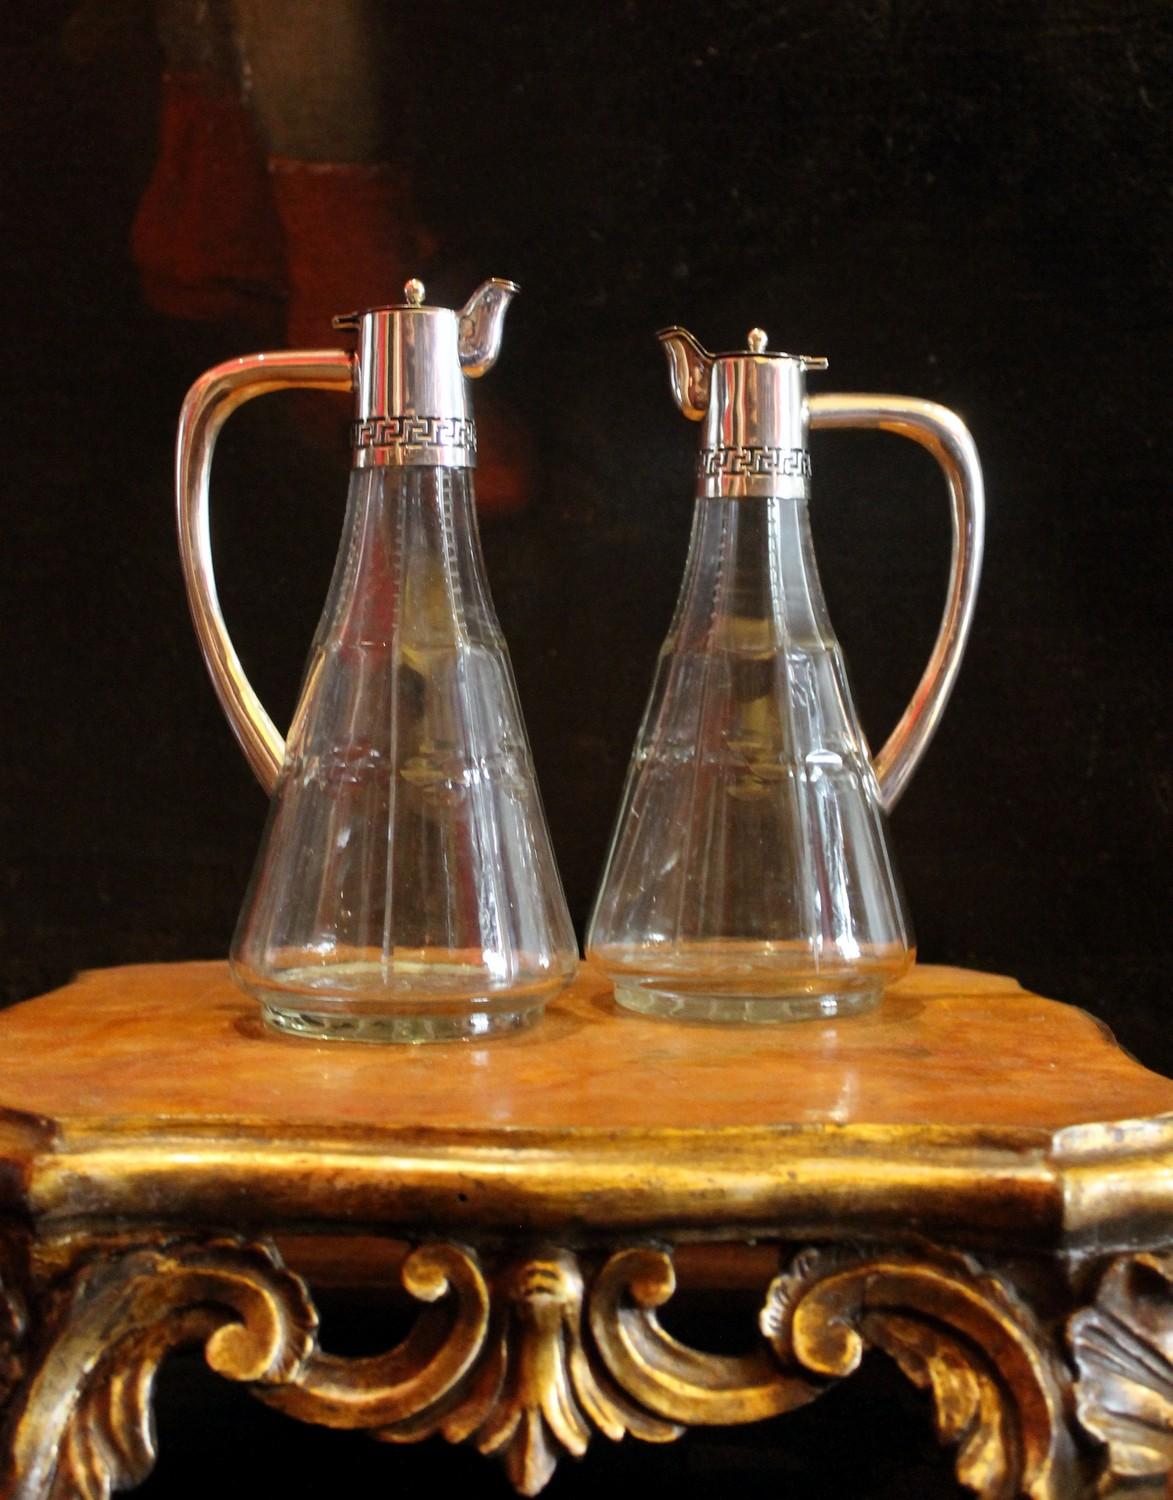 These oil and vinegar bottles are a sleek cruet condiment set, made of fine and elaborate cut crystal and sterling silver with a neoclassical appeal thanks to the Greek key pattern that never goes out of style
The glass bottles, cutted with